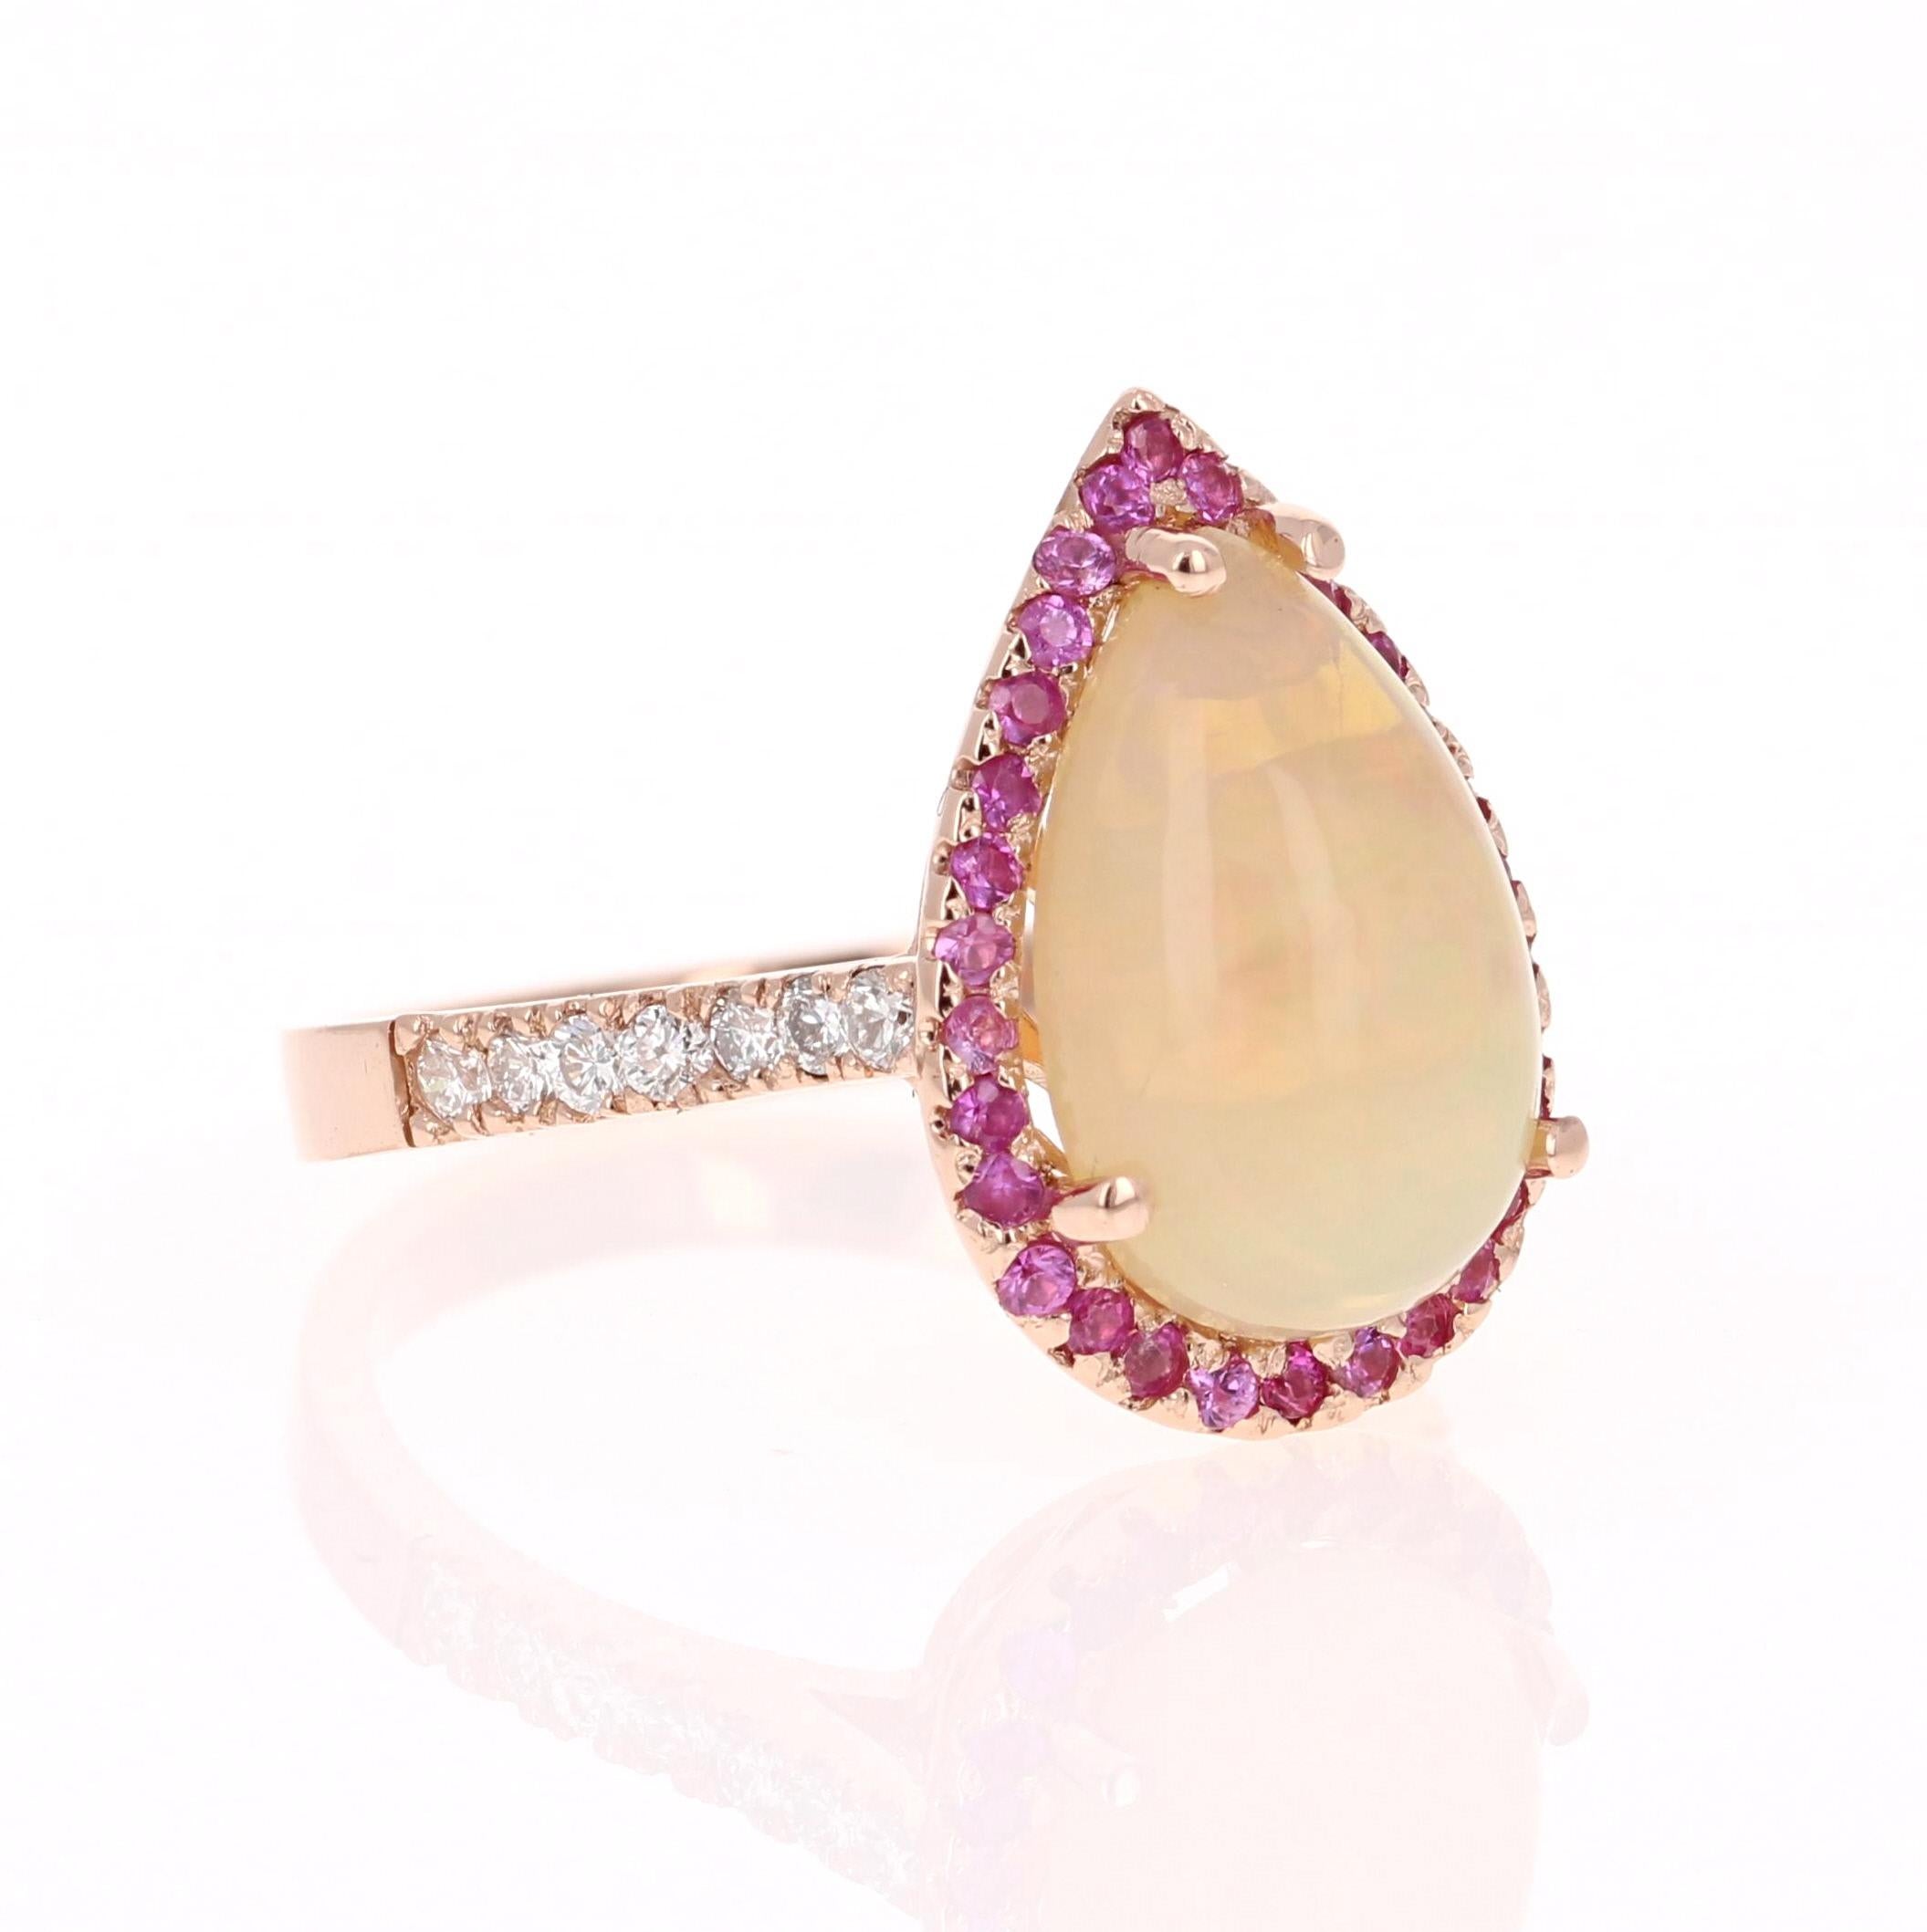 3.75 Carat Opal, Pink Sapphire and Diamond 18 Karat Rose Gold Cocktail or Engagement Ring

Unique and beautifully designed ring that can be a masterpiece to anyone's jewelry collection!   

This ring has a magnificently large 3.04 Carat Pear Cut